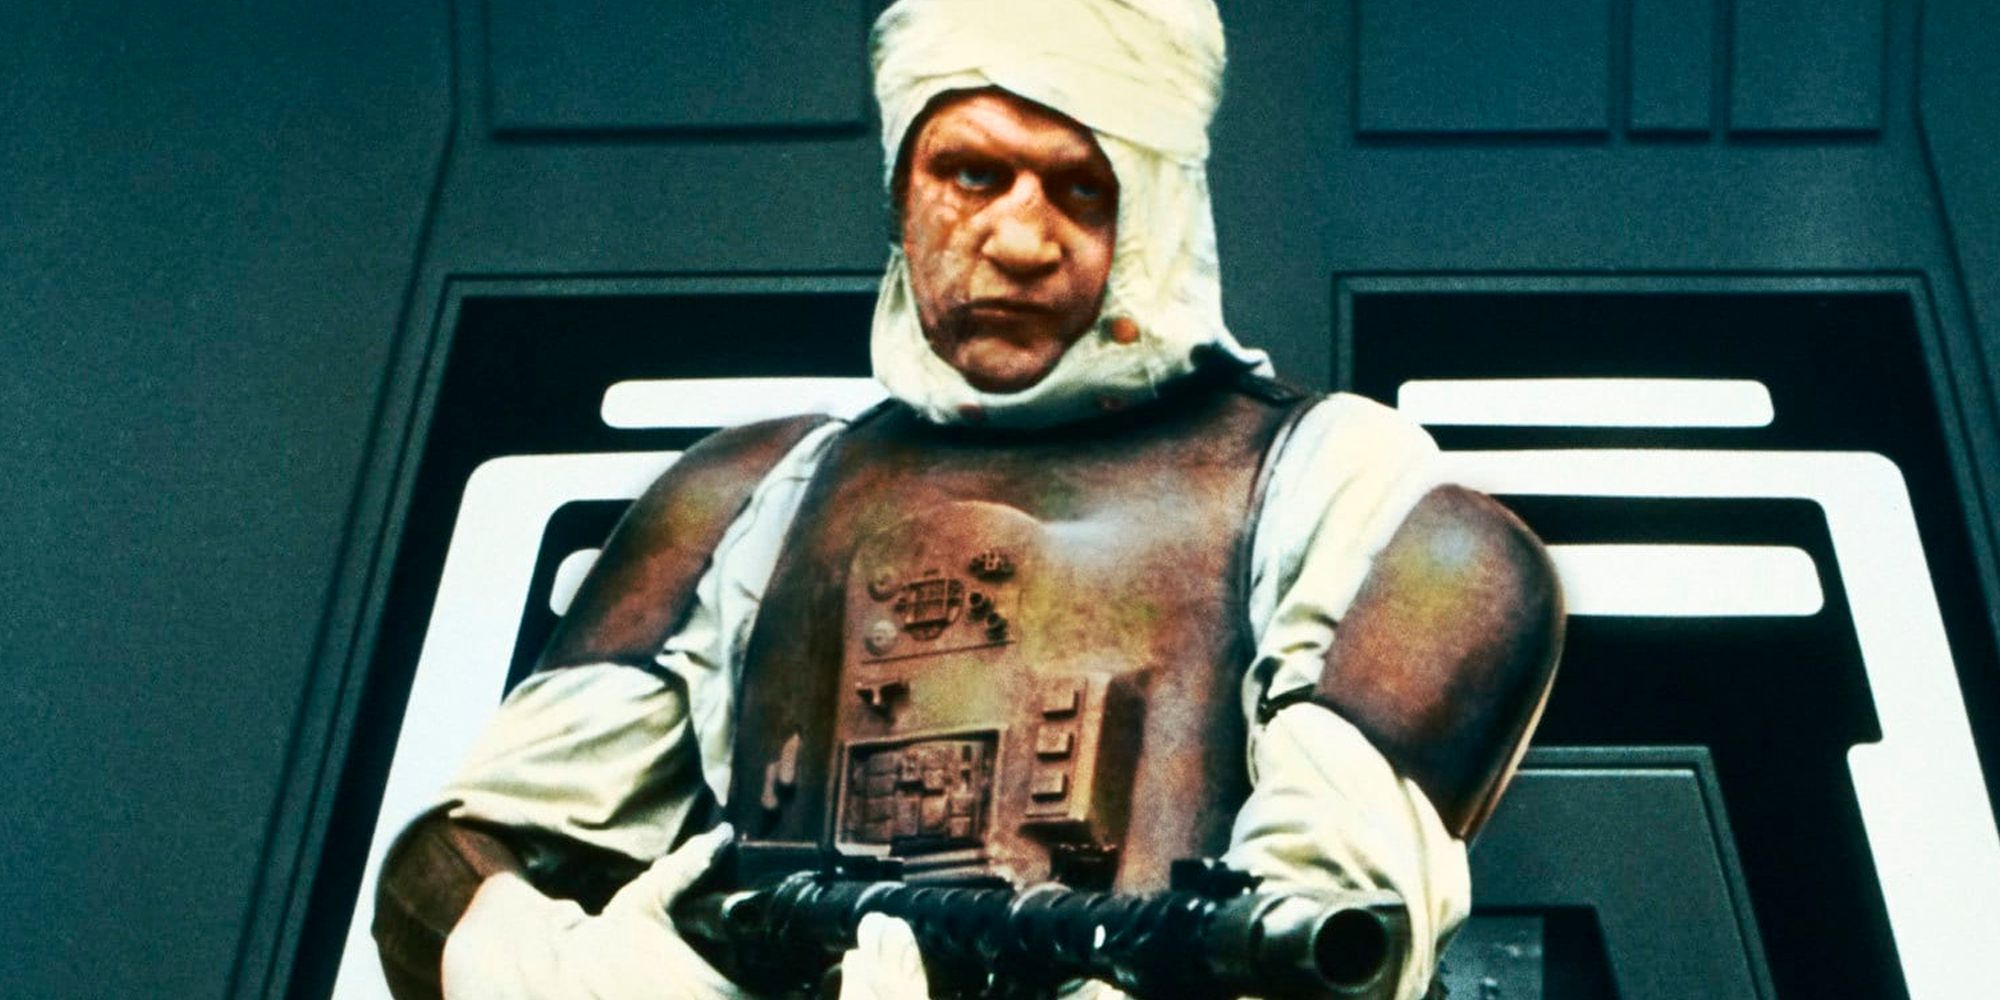 Bounty Hunter Dengar Appeared in The Empire Strikes Back and the novel Aftermath